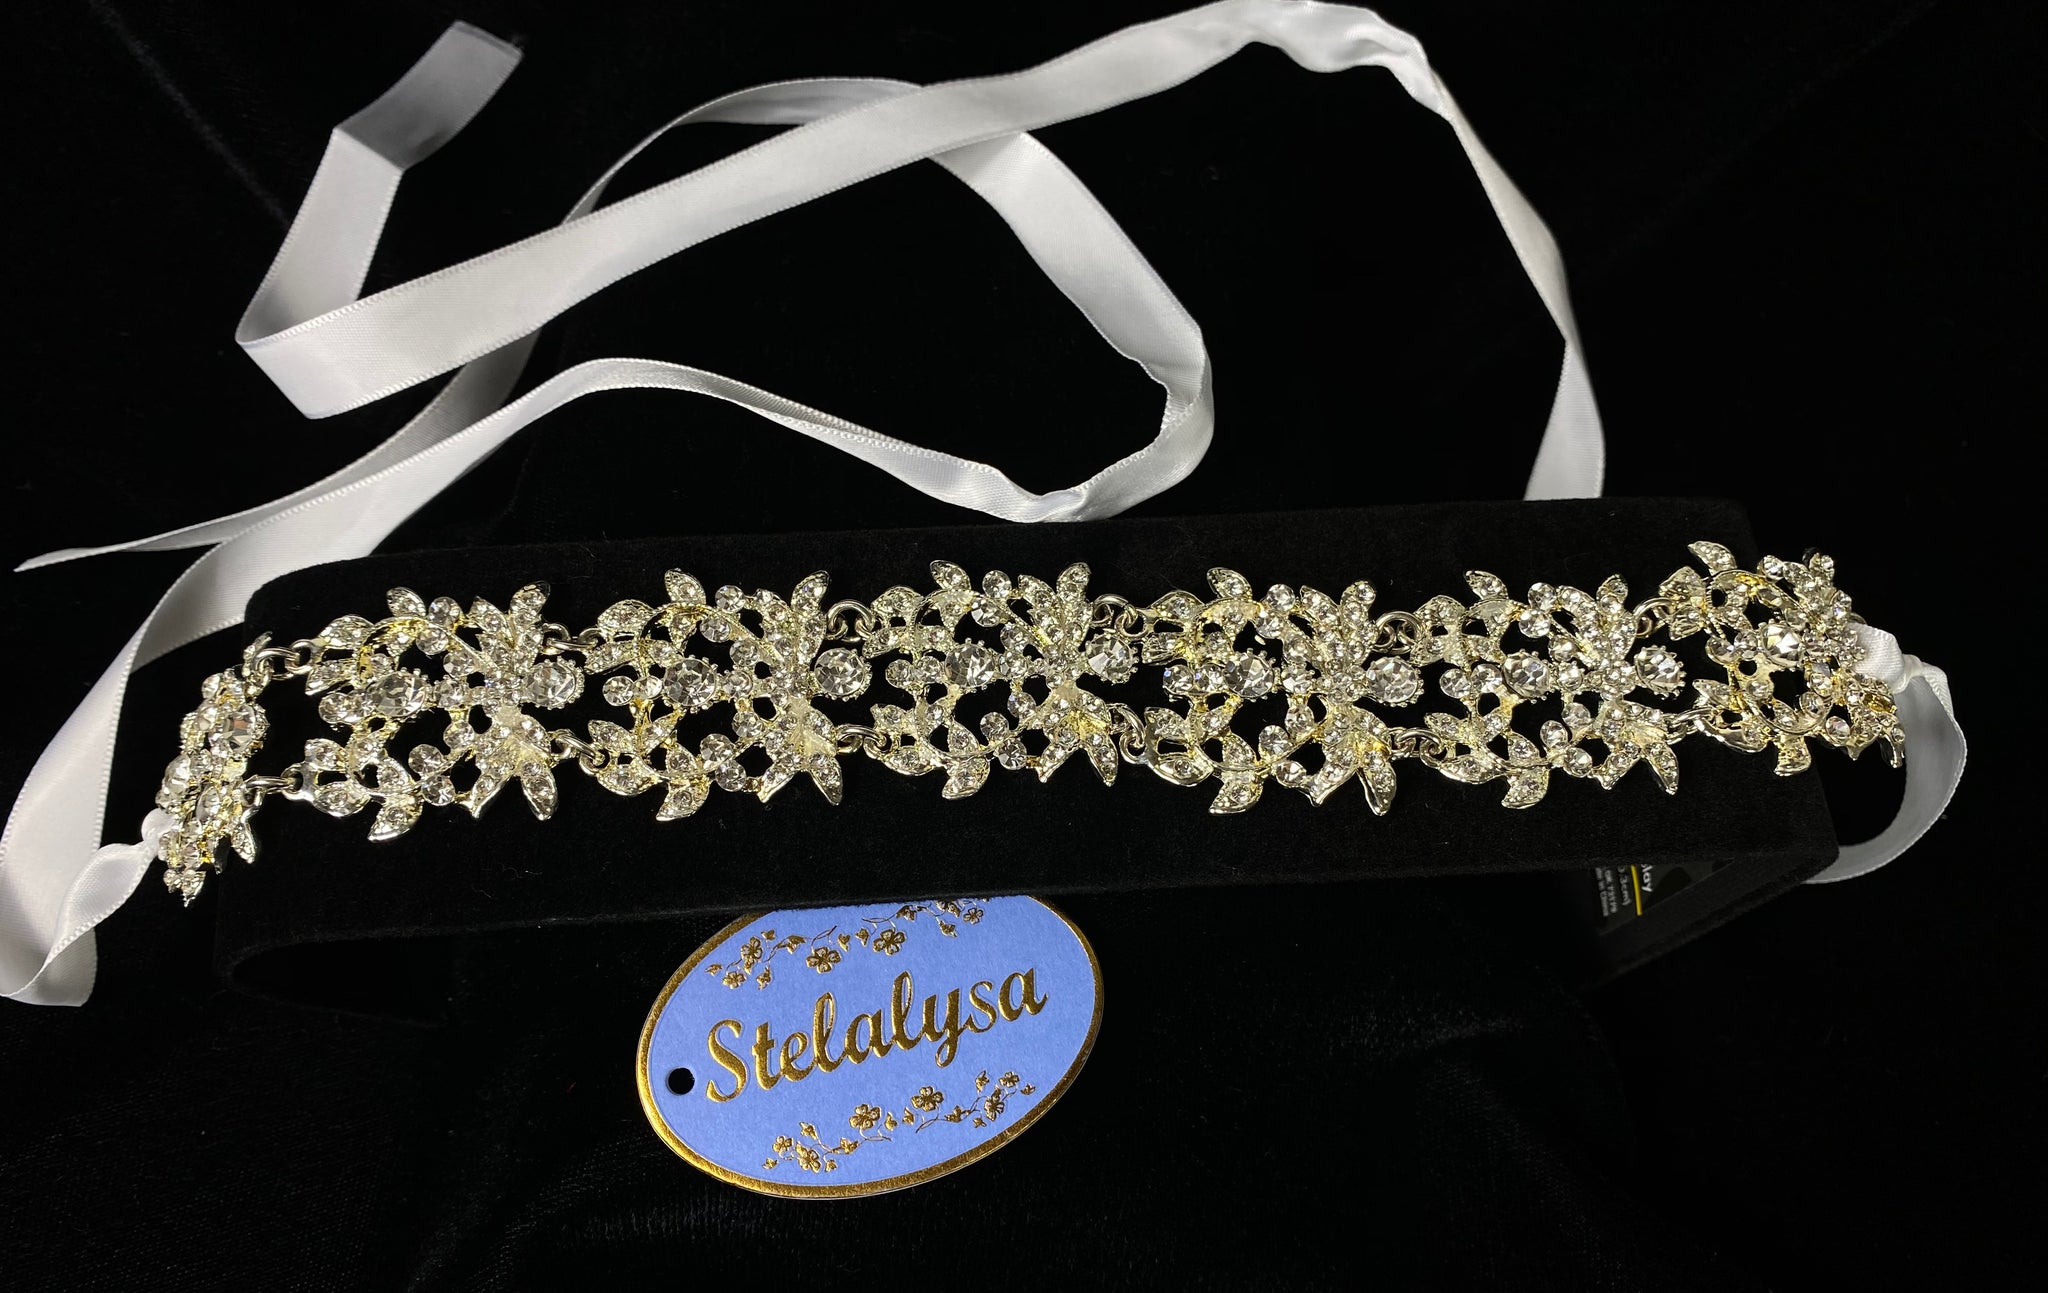 Communion Tie Back Headband   This is an elegant one-of-a-kind rhinestone headband.  Rhinestones are placed on metal with a smooth finish on back.  The headband ties with two satin ribbons giving it an elegant look.   This headband can be worn with any of the First Communion dresses.  Great look for after the ceremony.  She will look like the princess she is with this headband on her special day!  